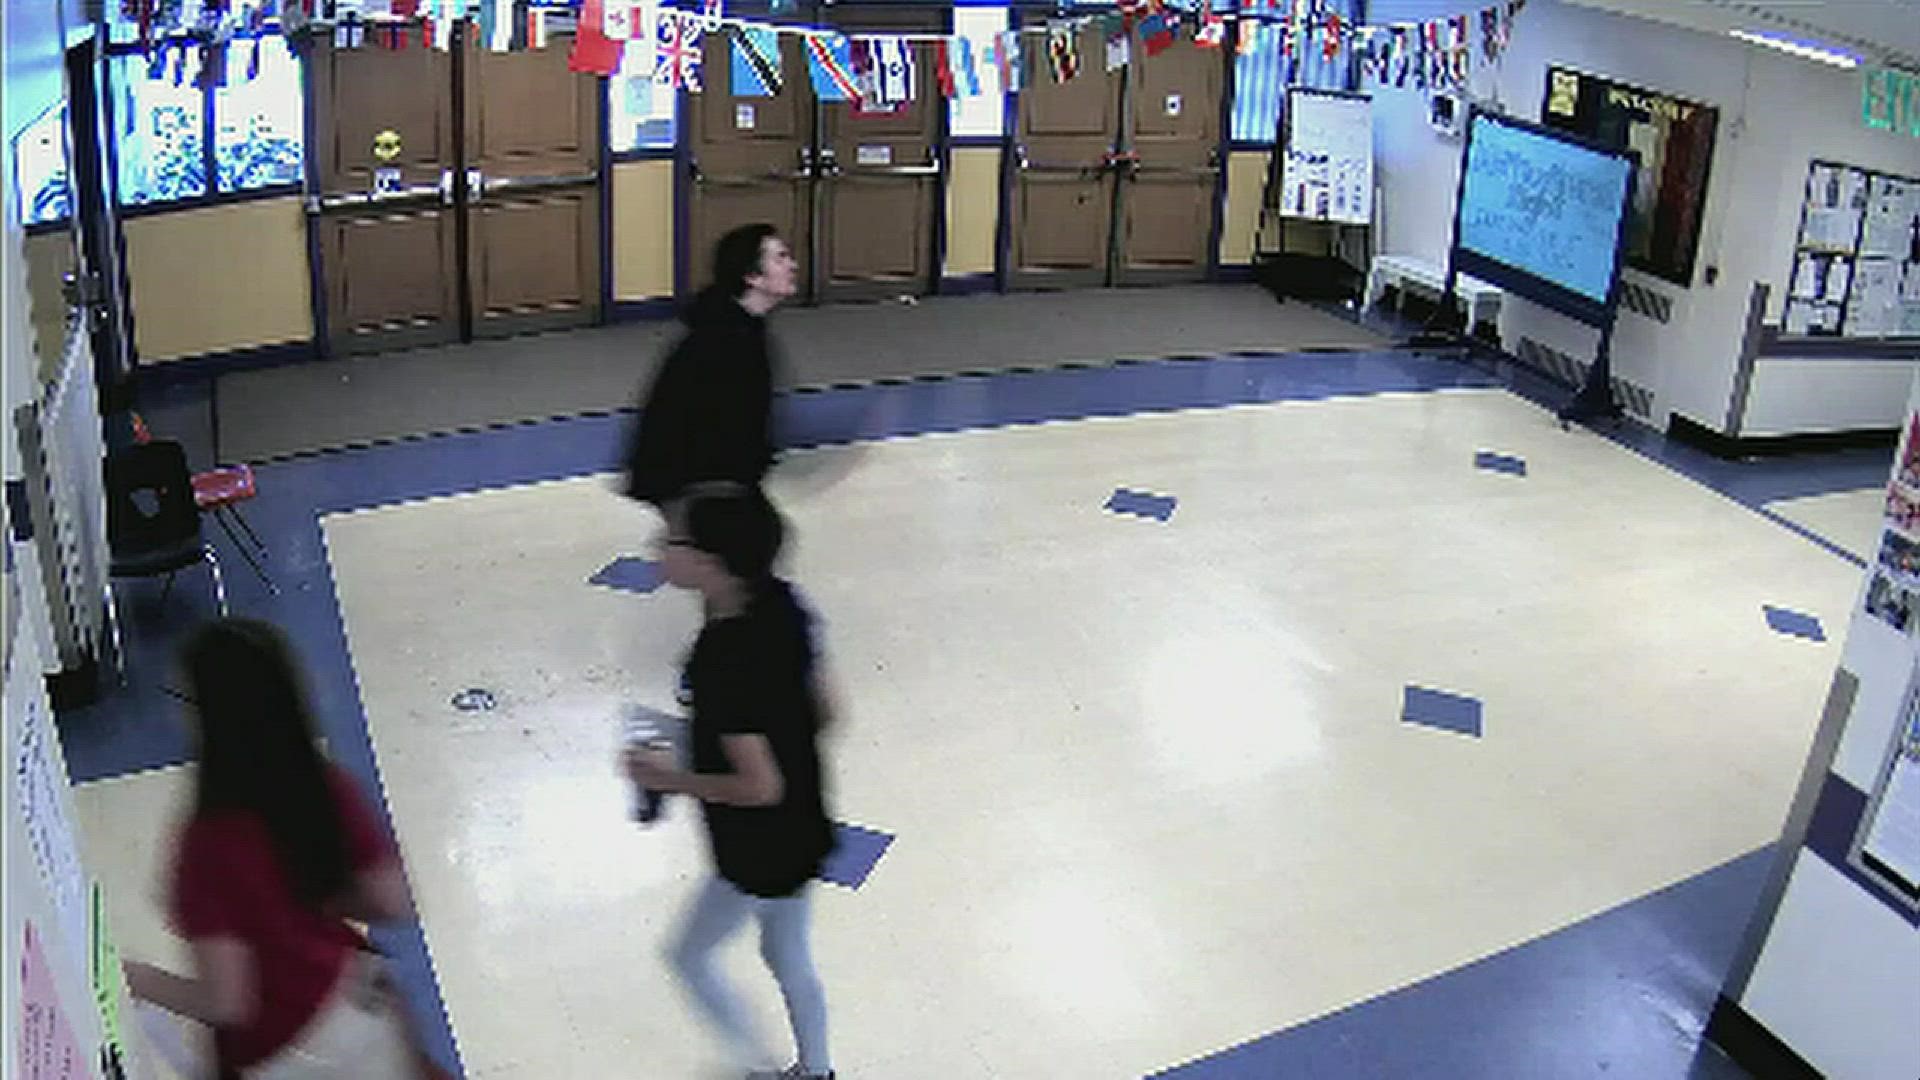 Surveillance video from Washington Middle School in Seattle shows a security guard slamming a 12-year-old boy to the ground. We have blurred the guard's face because there has been no official determination he violated policy. The boy's mother gave permission to show her son.